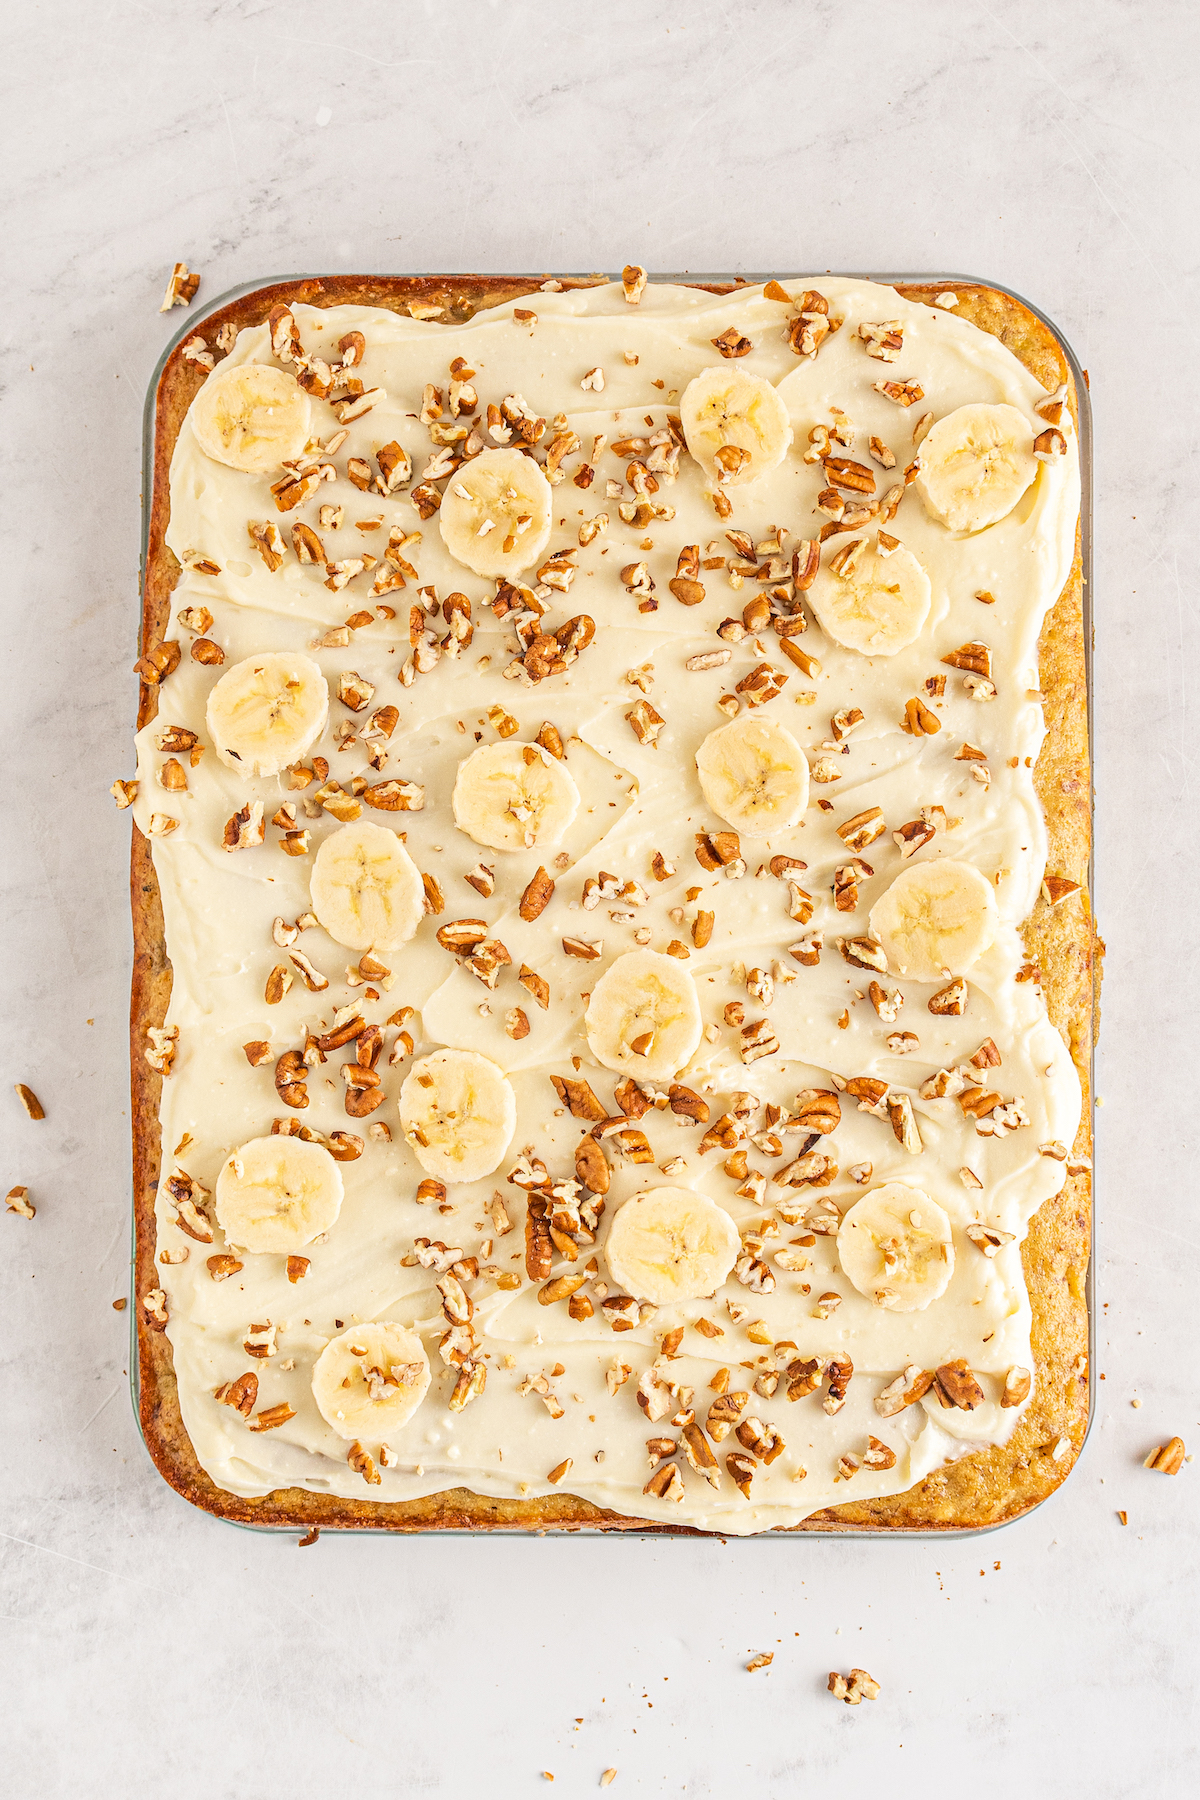 An unmolded sheet cake topped with frosting, pecans, and banana slices.